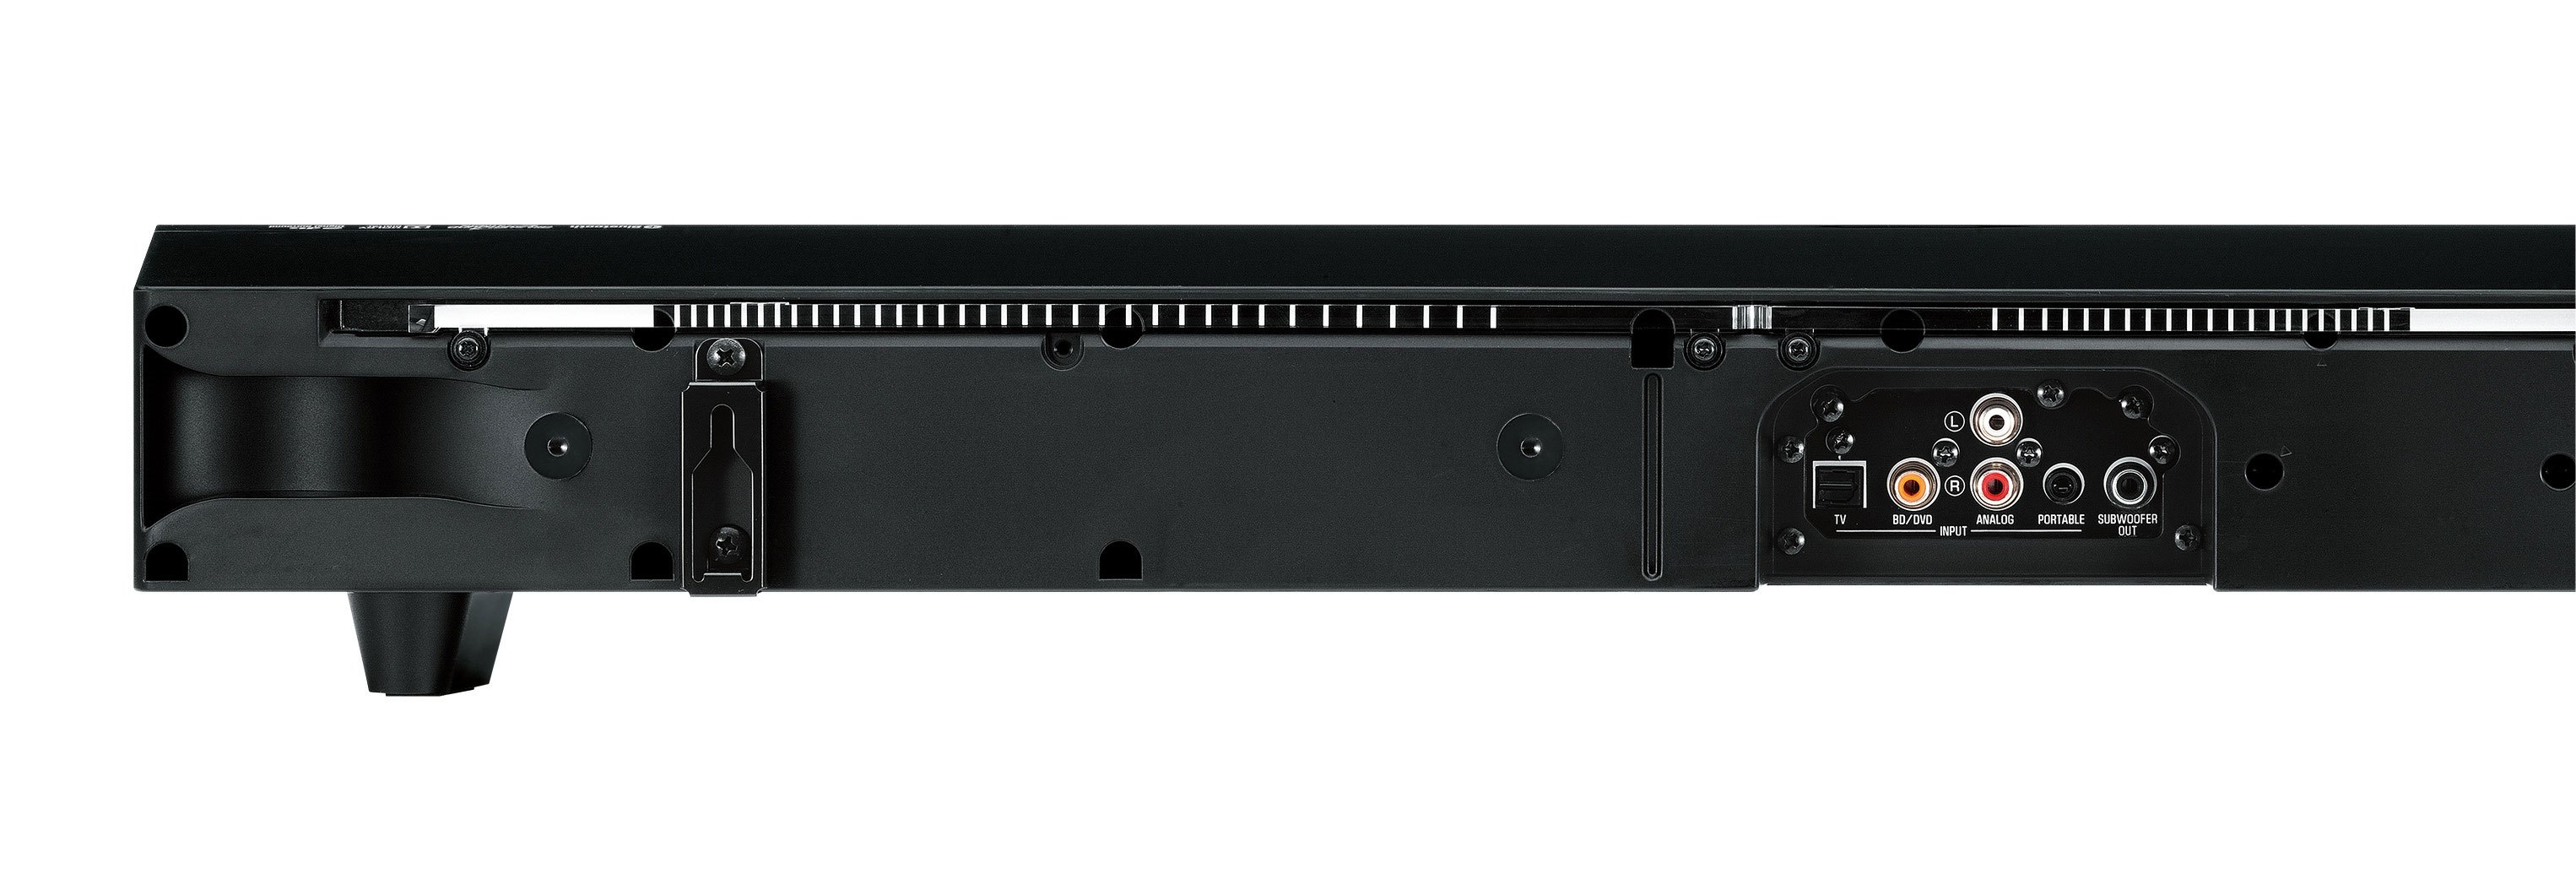 YAS-152 - Overview - Sound Bars - Audio & Visual - Products 